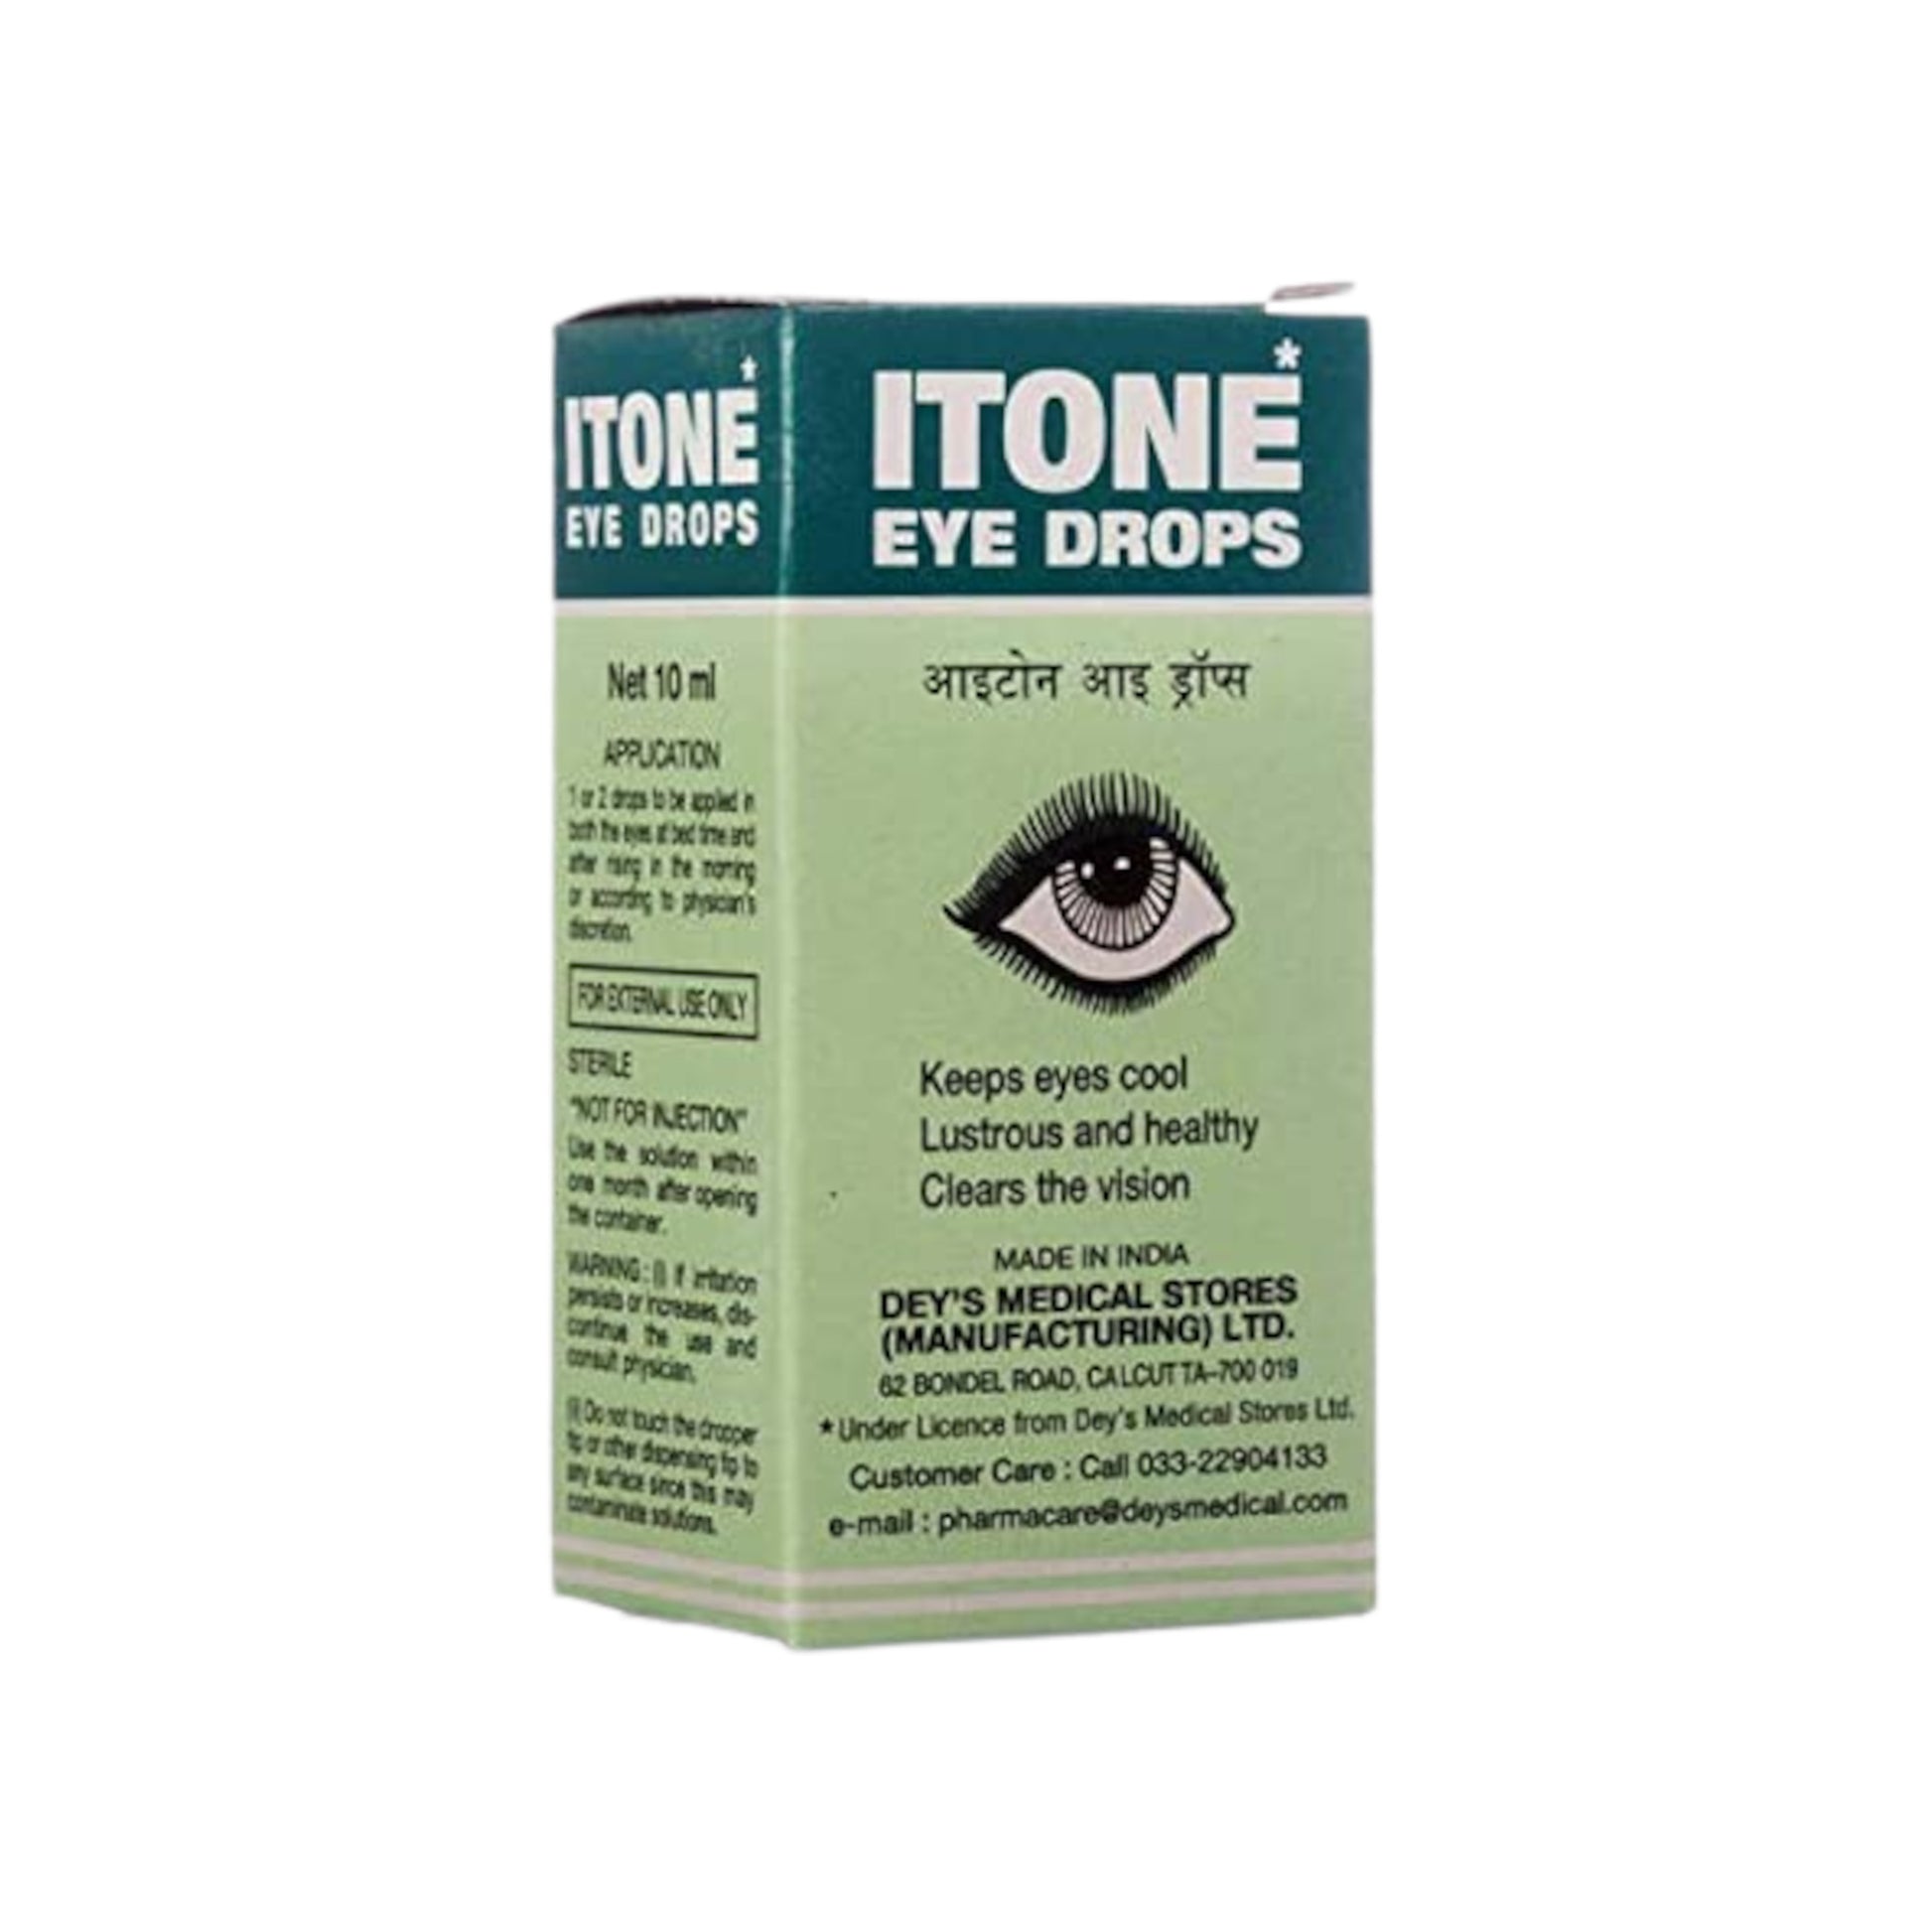 Image: ITONE Eye Drops 10 ml - Soothes irritation, redness, infections, and protects against environmental stressors.